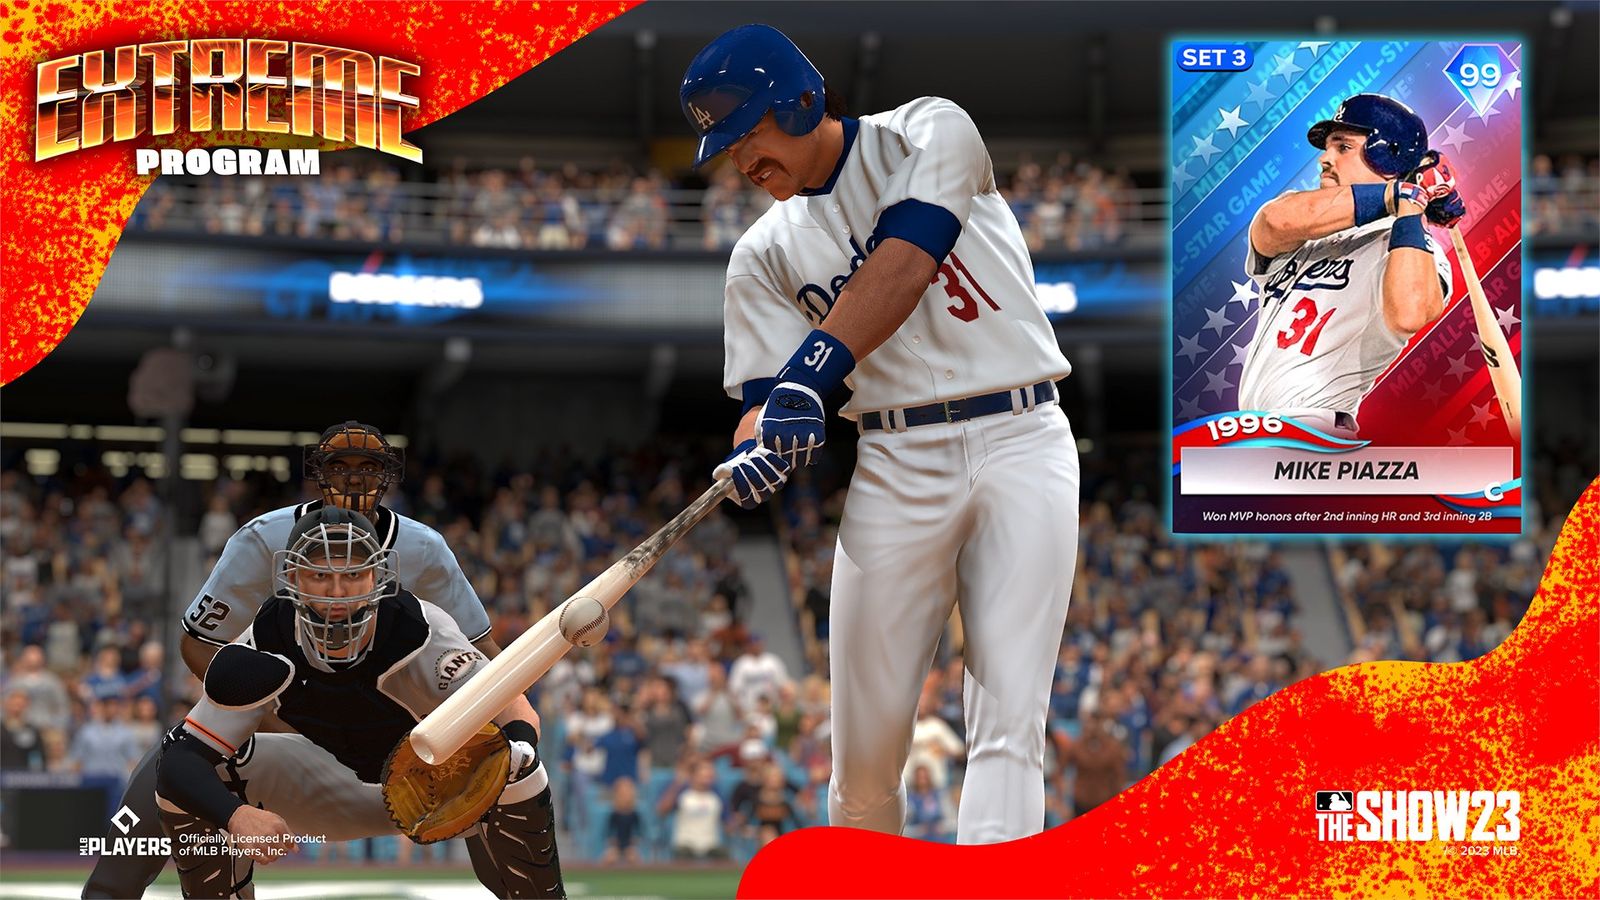 MLB The Show 23 Extreme Program Mike Piazza 